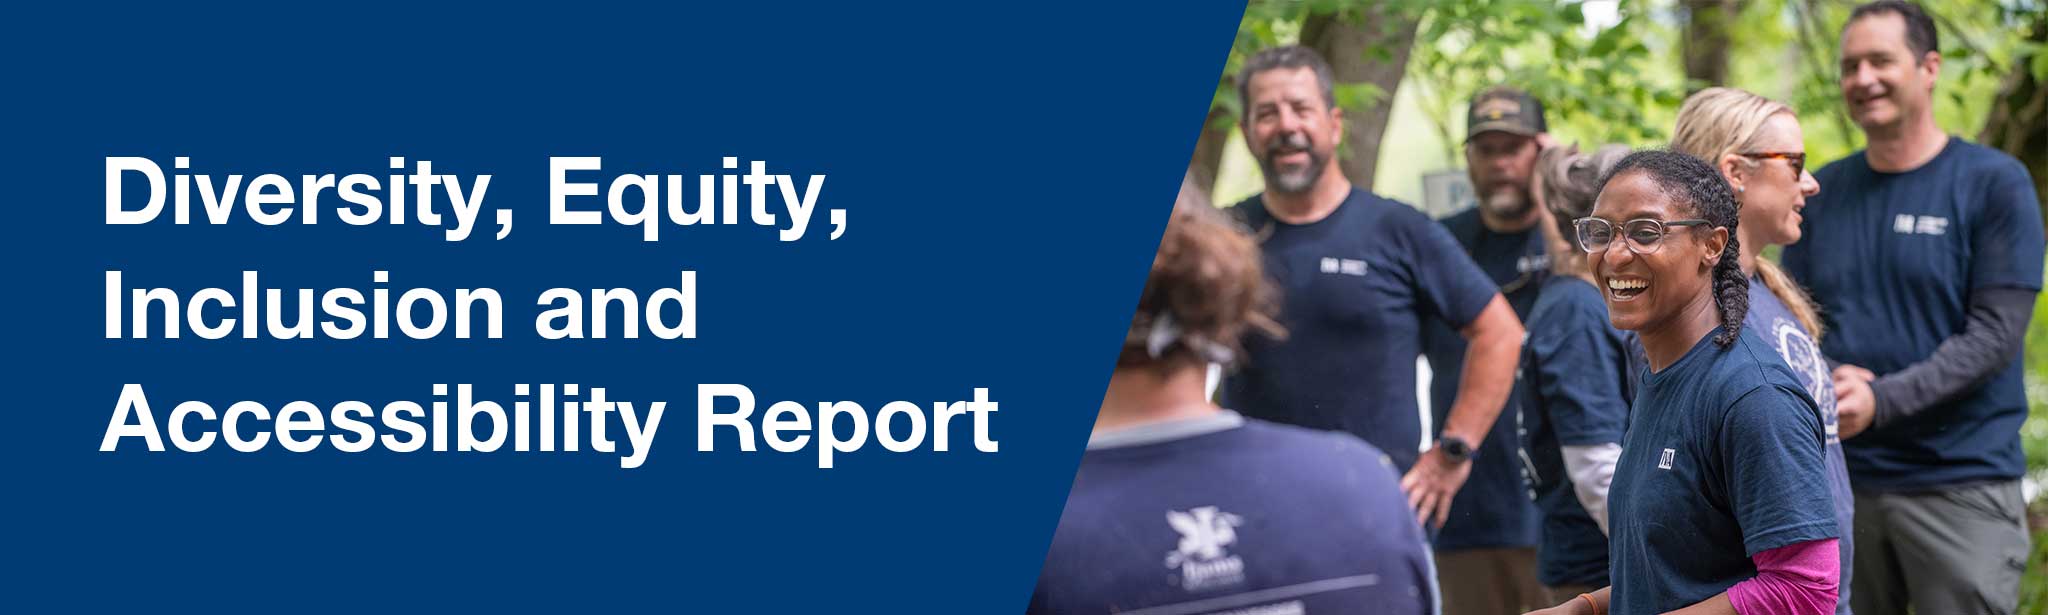 Diversity, Equity, Inclusion and Accessibility Report